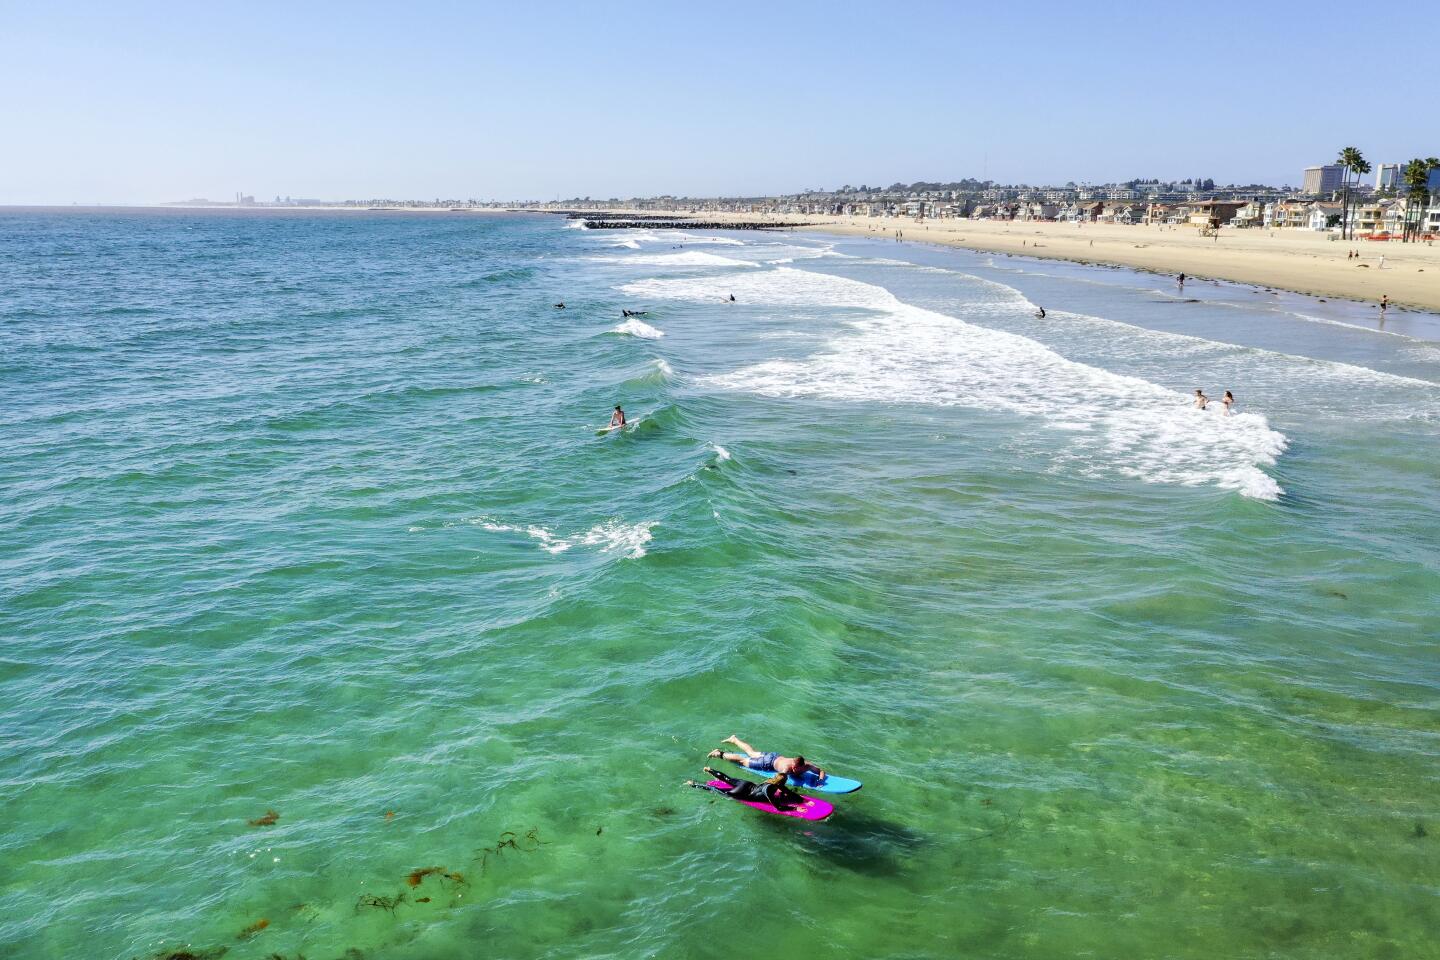 An aerial view of a few surfers and beach-goers enjoying a nice day at the beach despite Gov. Gavin Newsom's hard closure, which is still in place in Newport Beach.